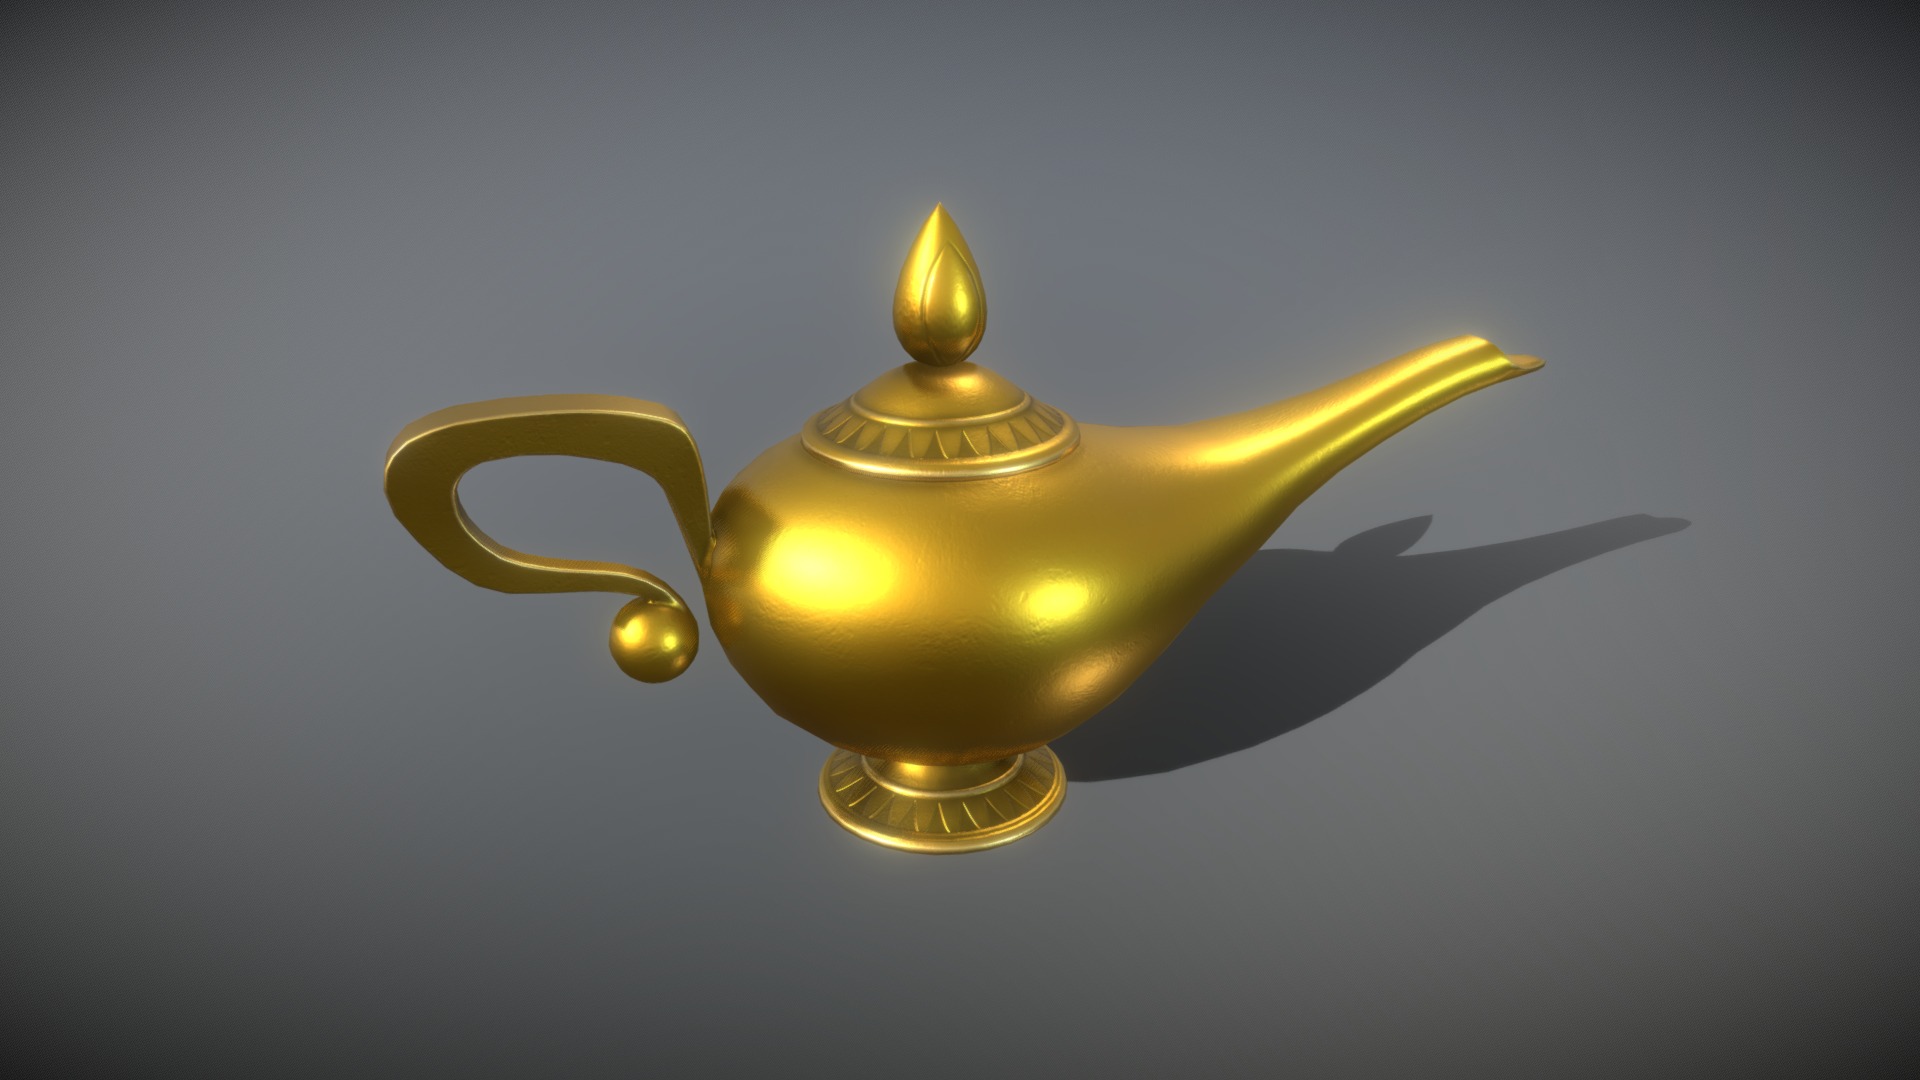 3D model Stylized Genie Lamp - This is a 3D model of the Stylized Genie Lamp. The 3D model is about a gold and brass lamp.